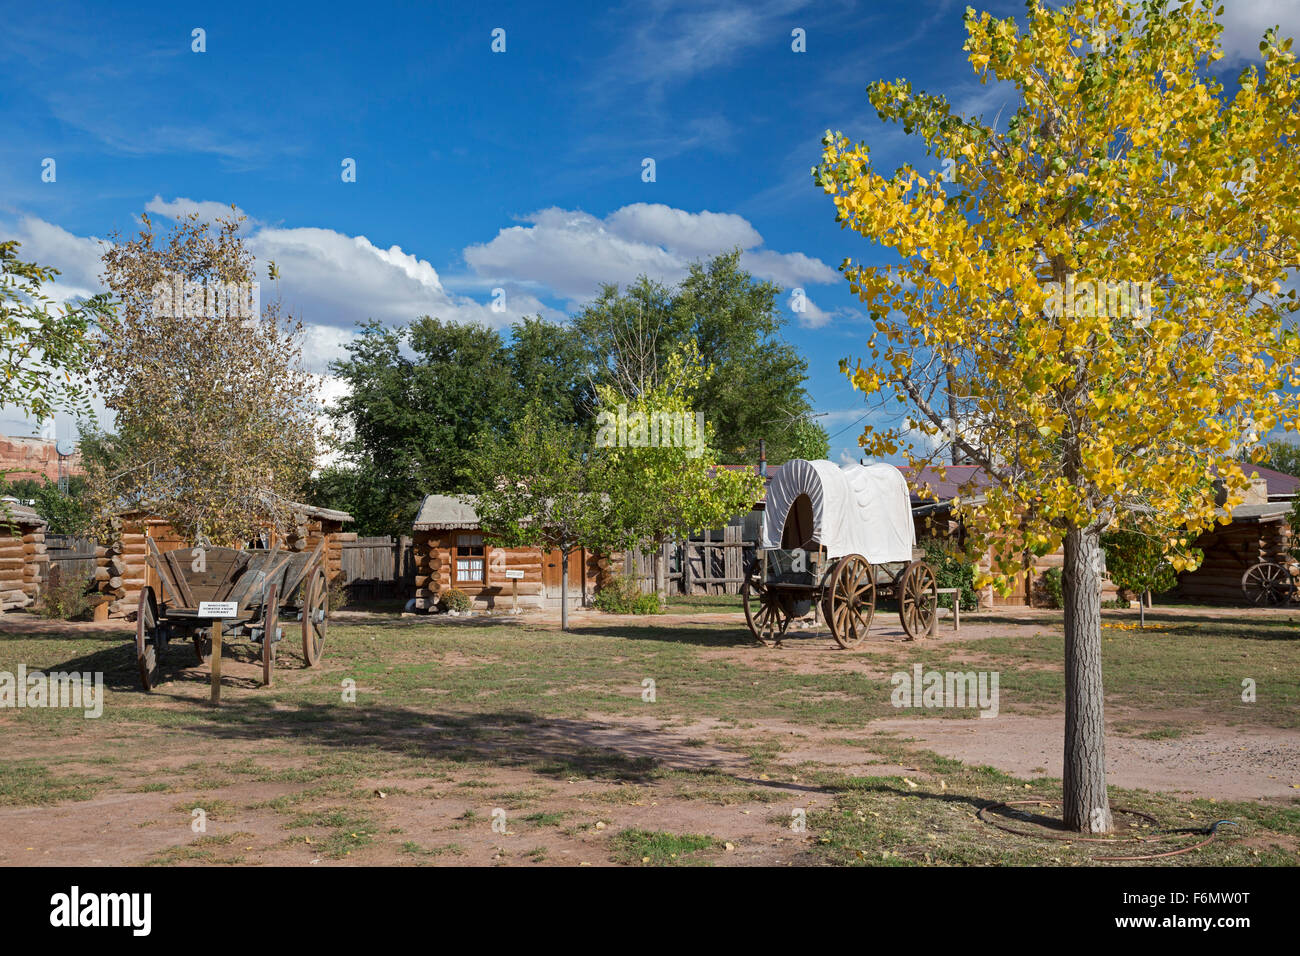 Bluff, Utah - The Bluff Fort Historic Site. Bluff Fort was settled in 1880 by Mormon pioneers. Stock Photo